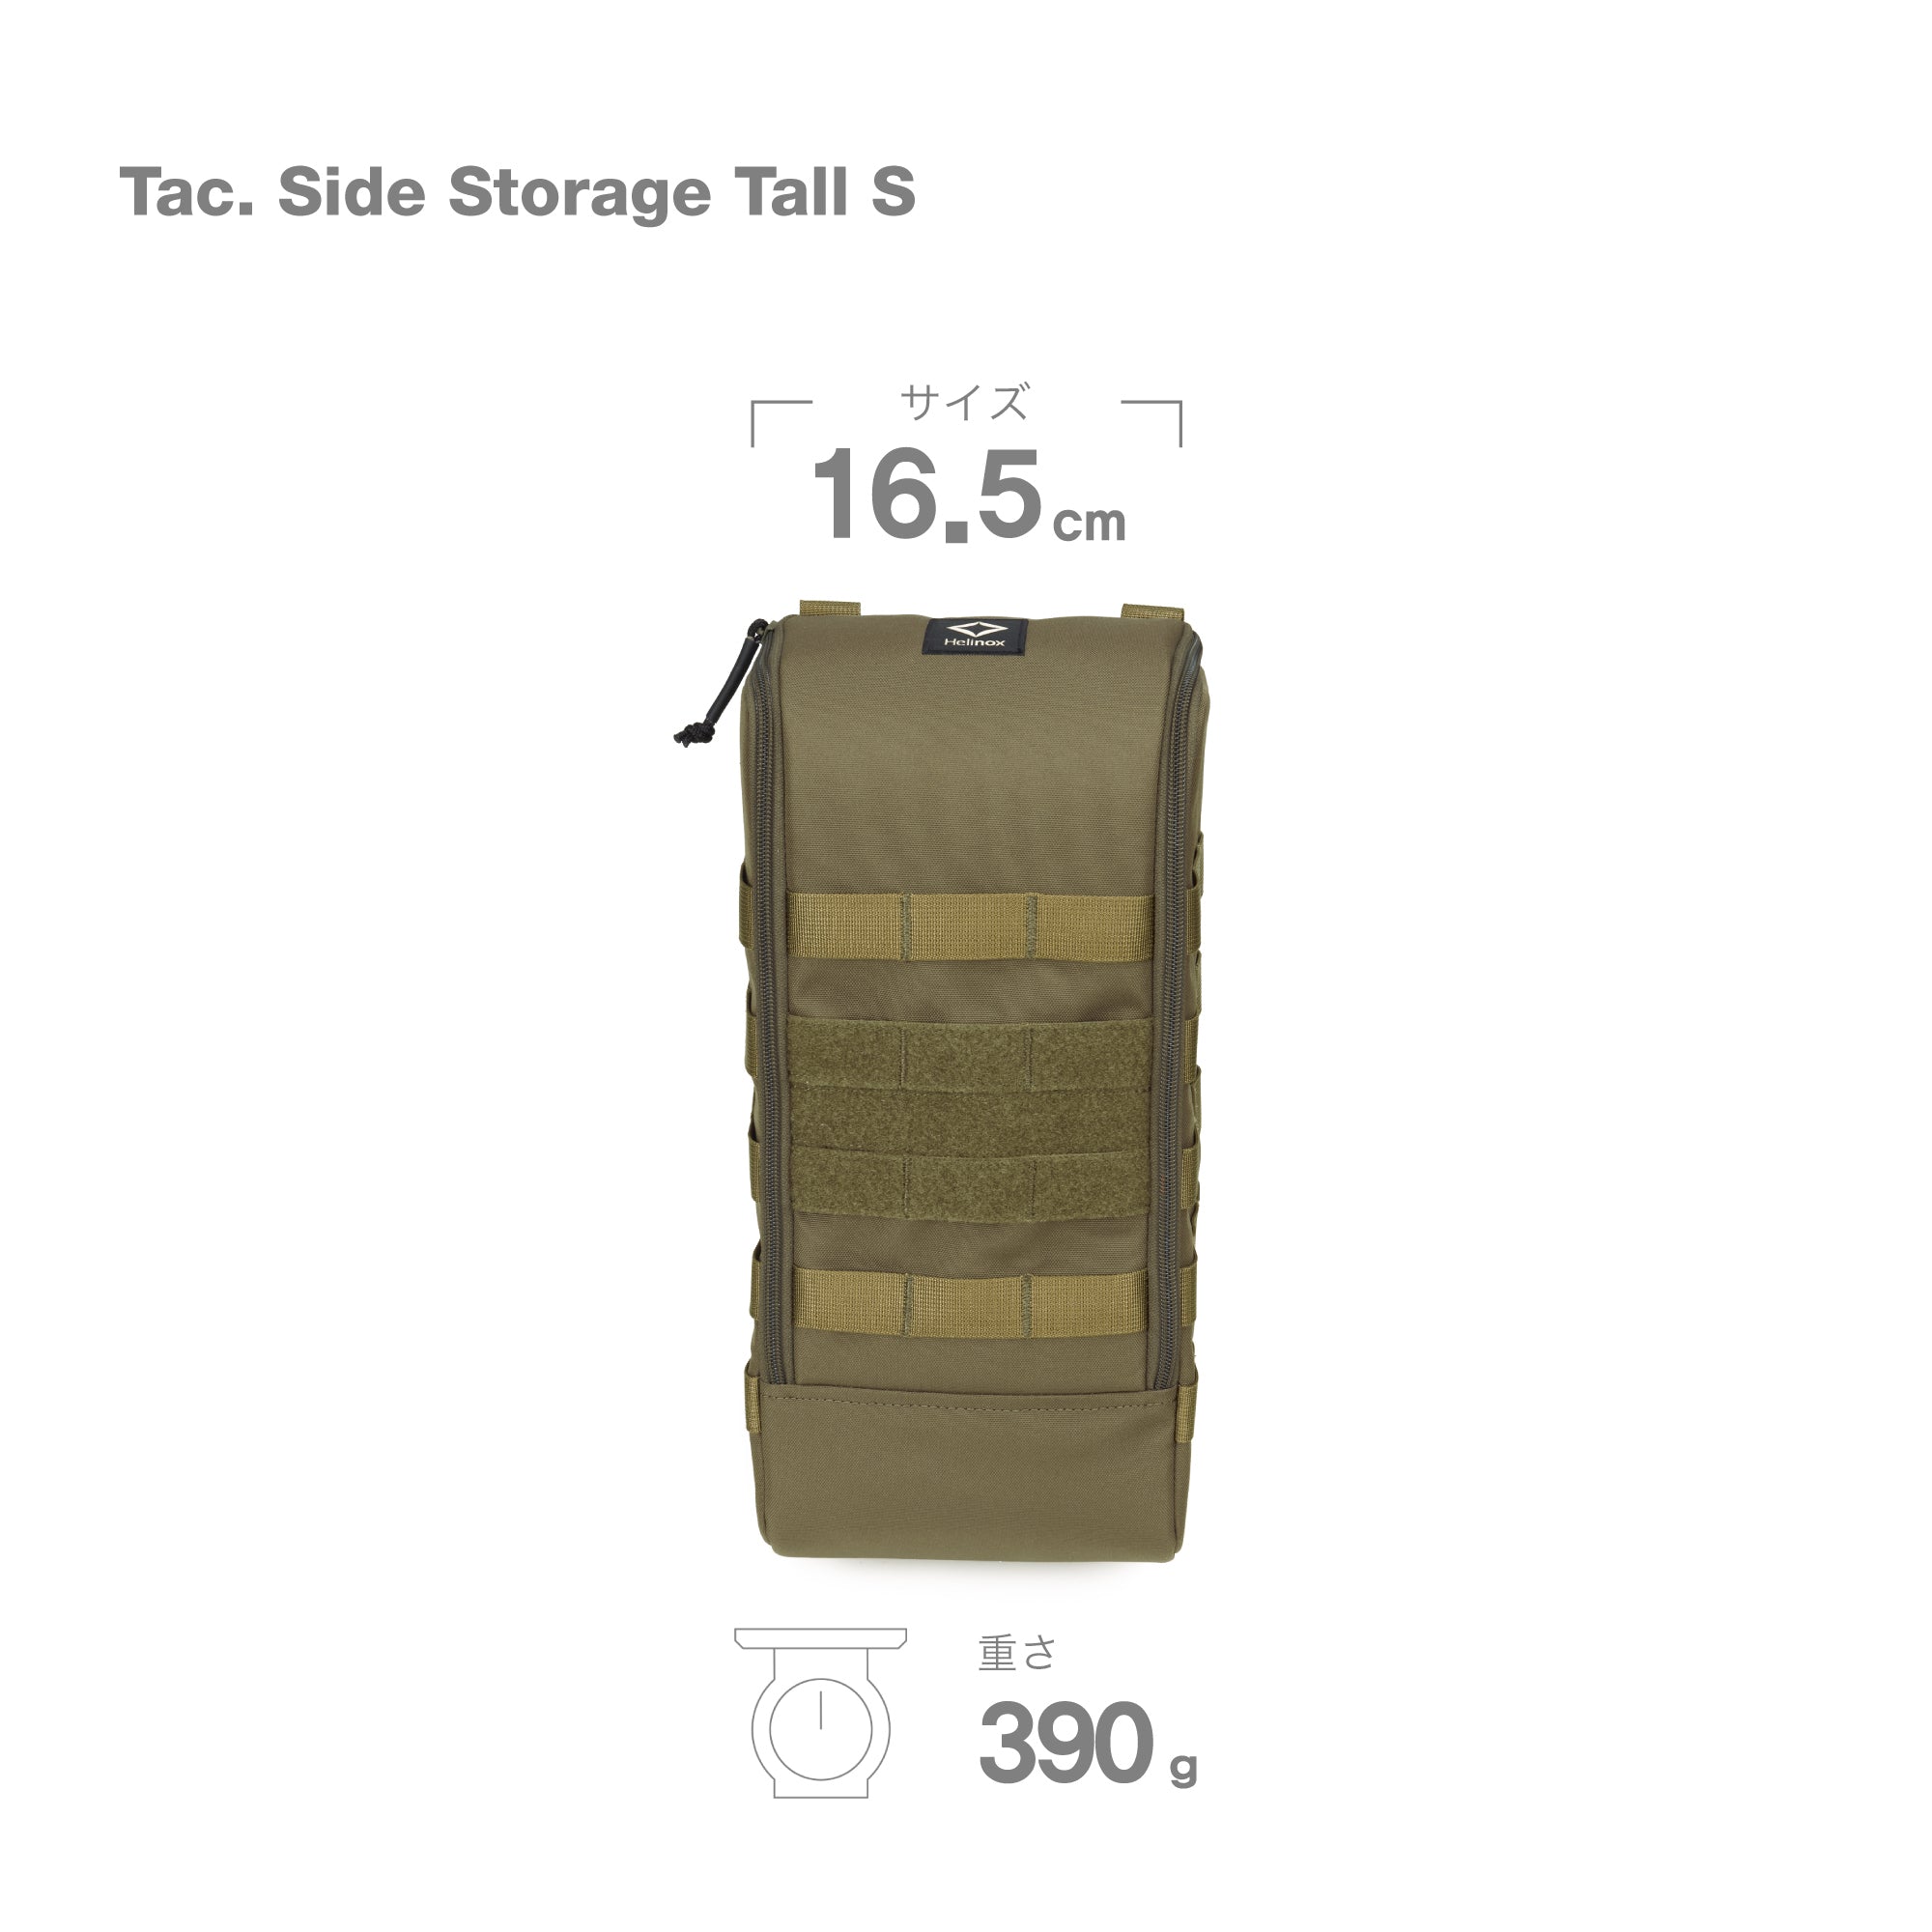 Tac. Side Storage Tall S - Coyote Tan